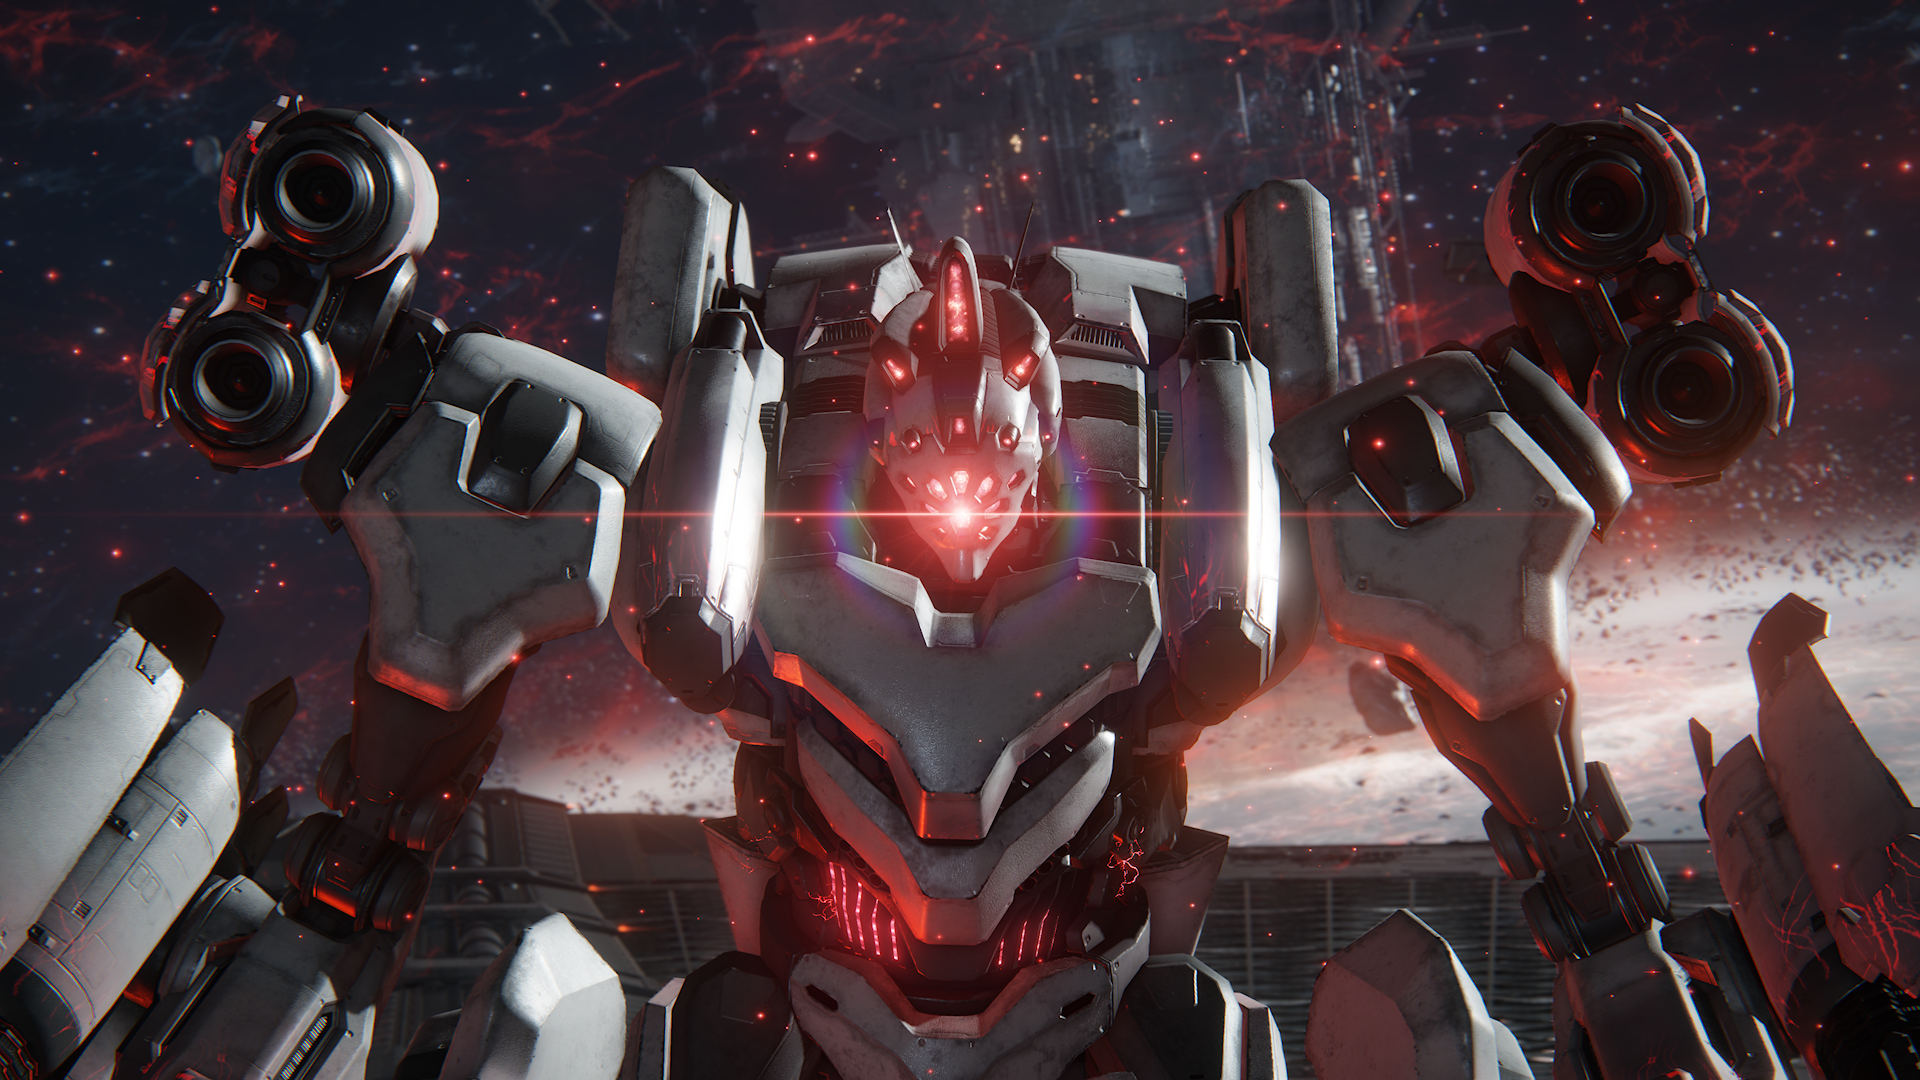 Armored Core VI Will Have Multiple Endings and Secret Bosses